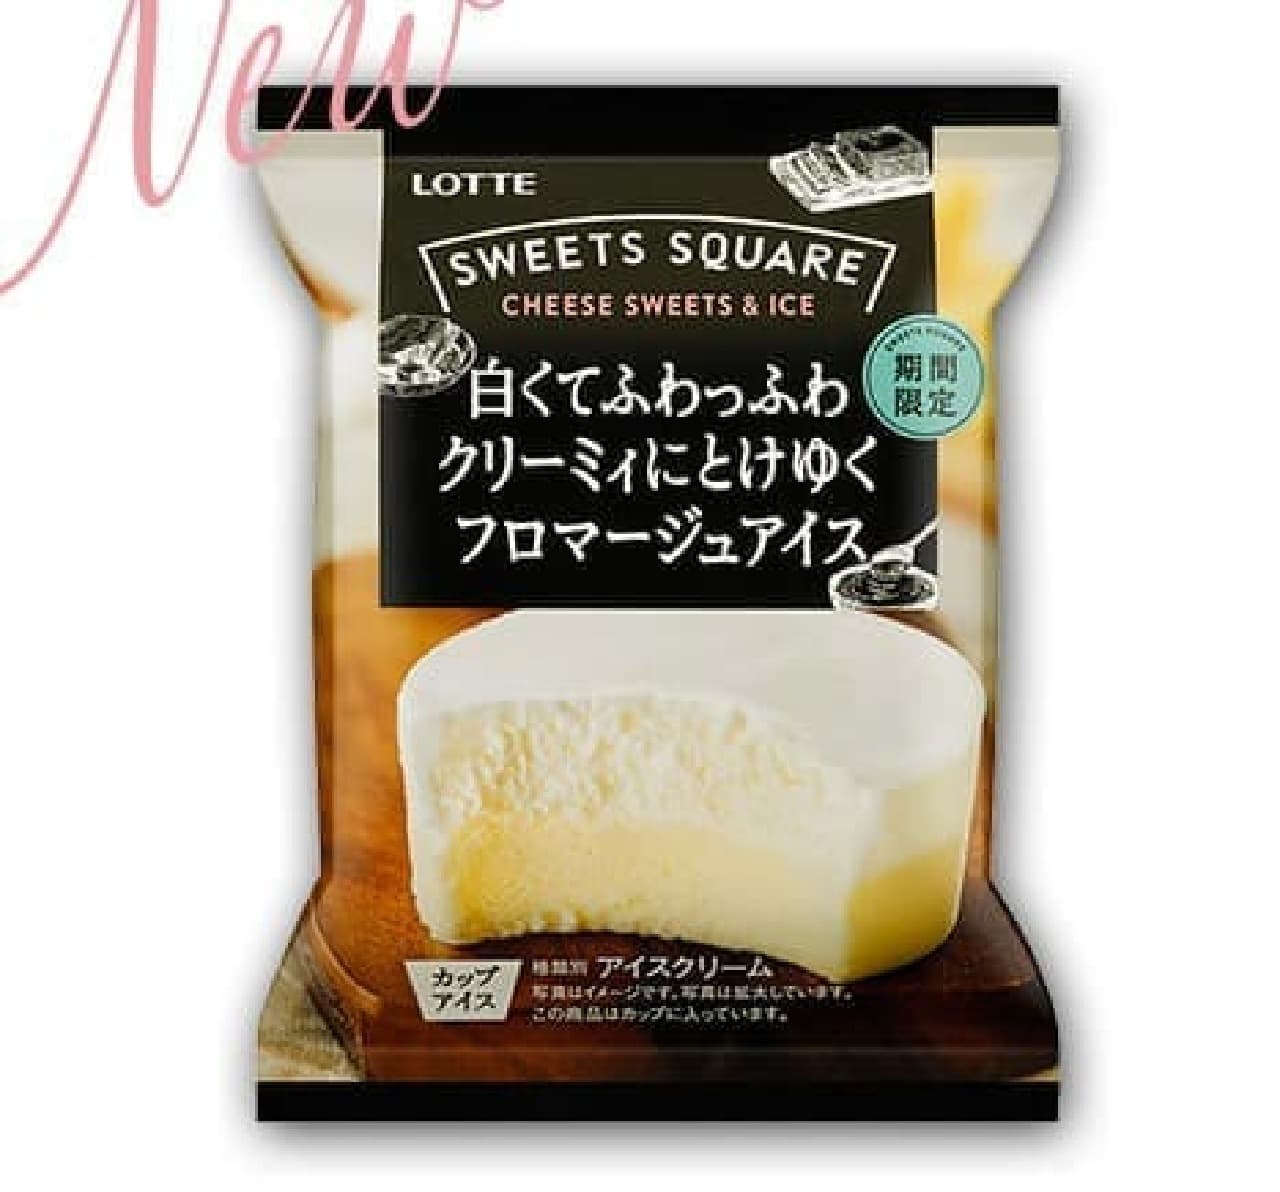 Sweets Square White and fluffy creamy melted fromage ice cream